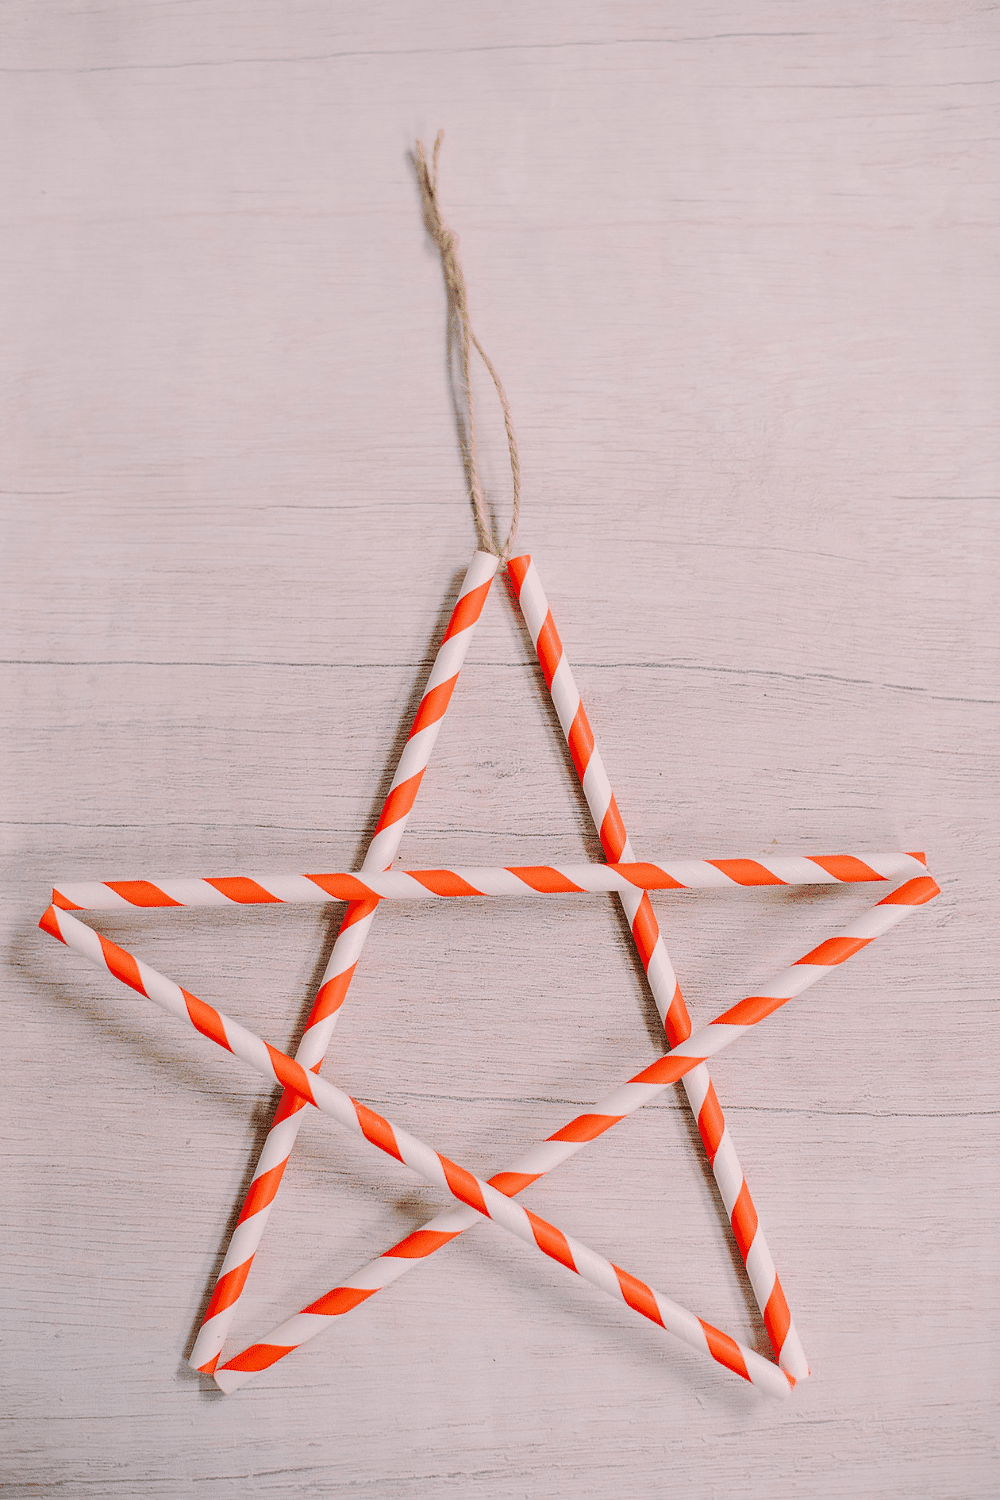 How to Make Drinking Straw Star Ornaments